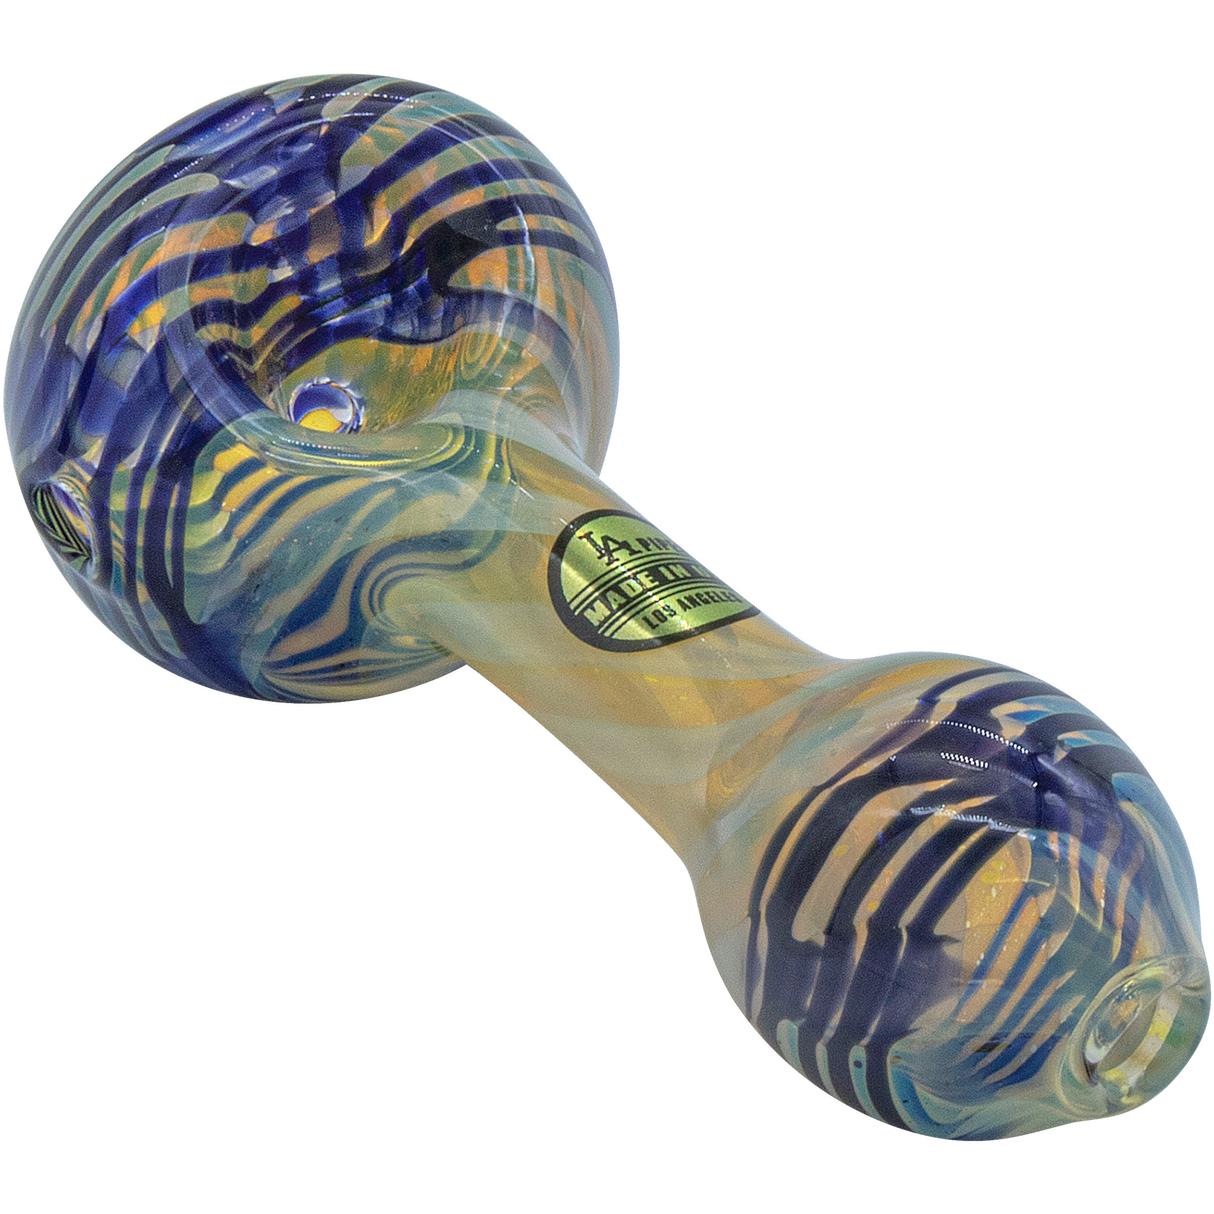 LA Pipes Twisty Cane Spoon Glass Pipe in Blue, Side View, Borosilicate Glass, USA Made